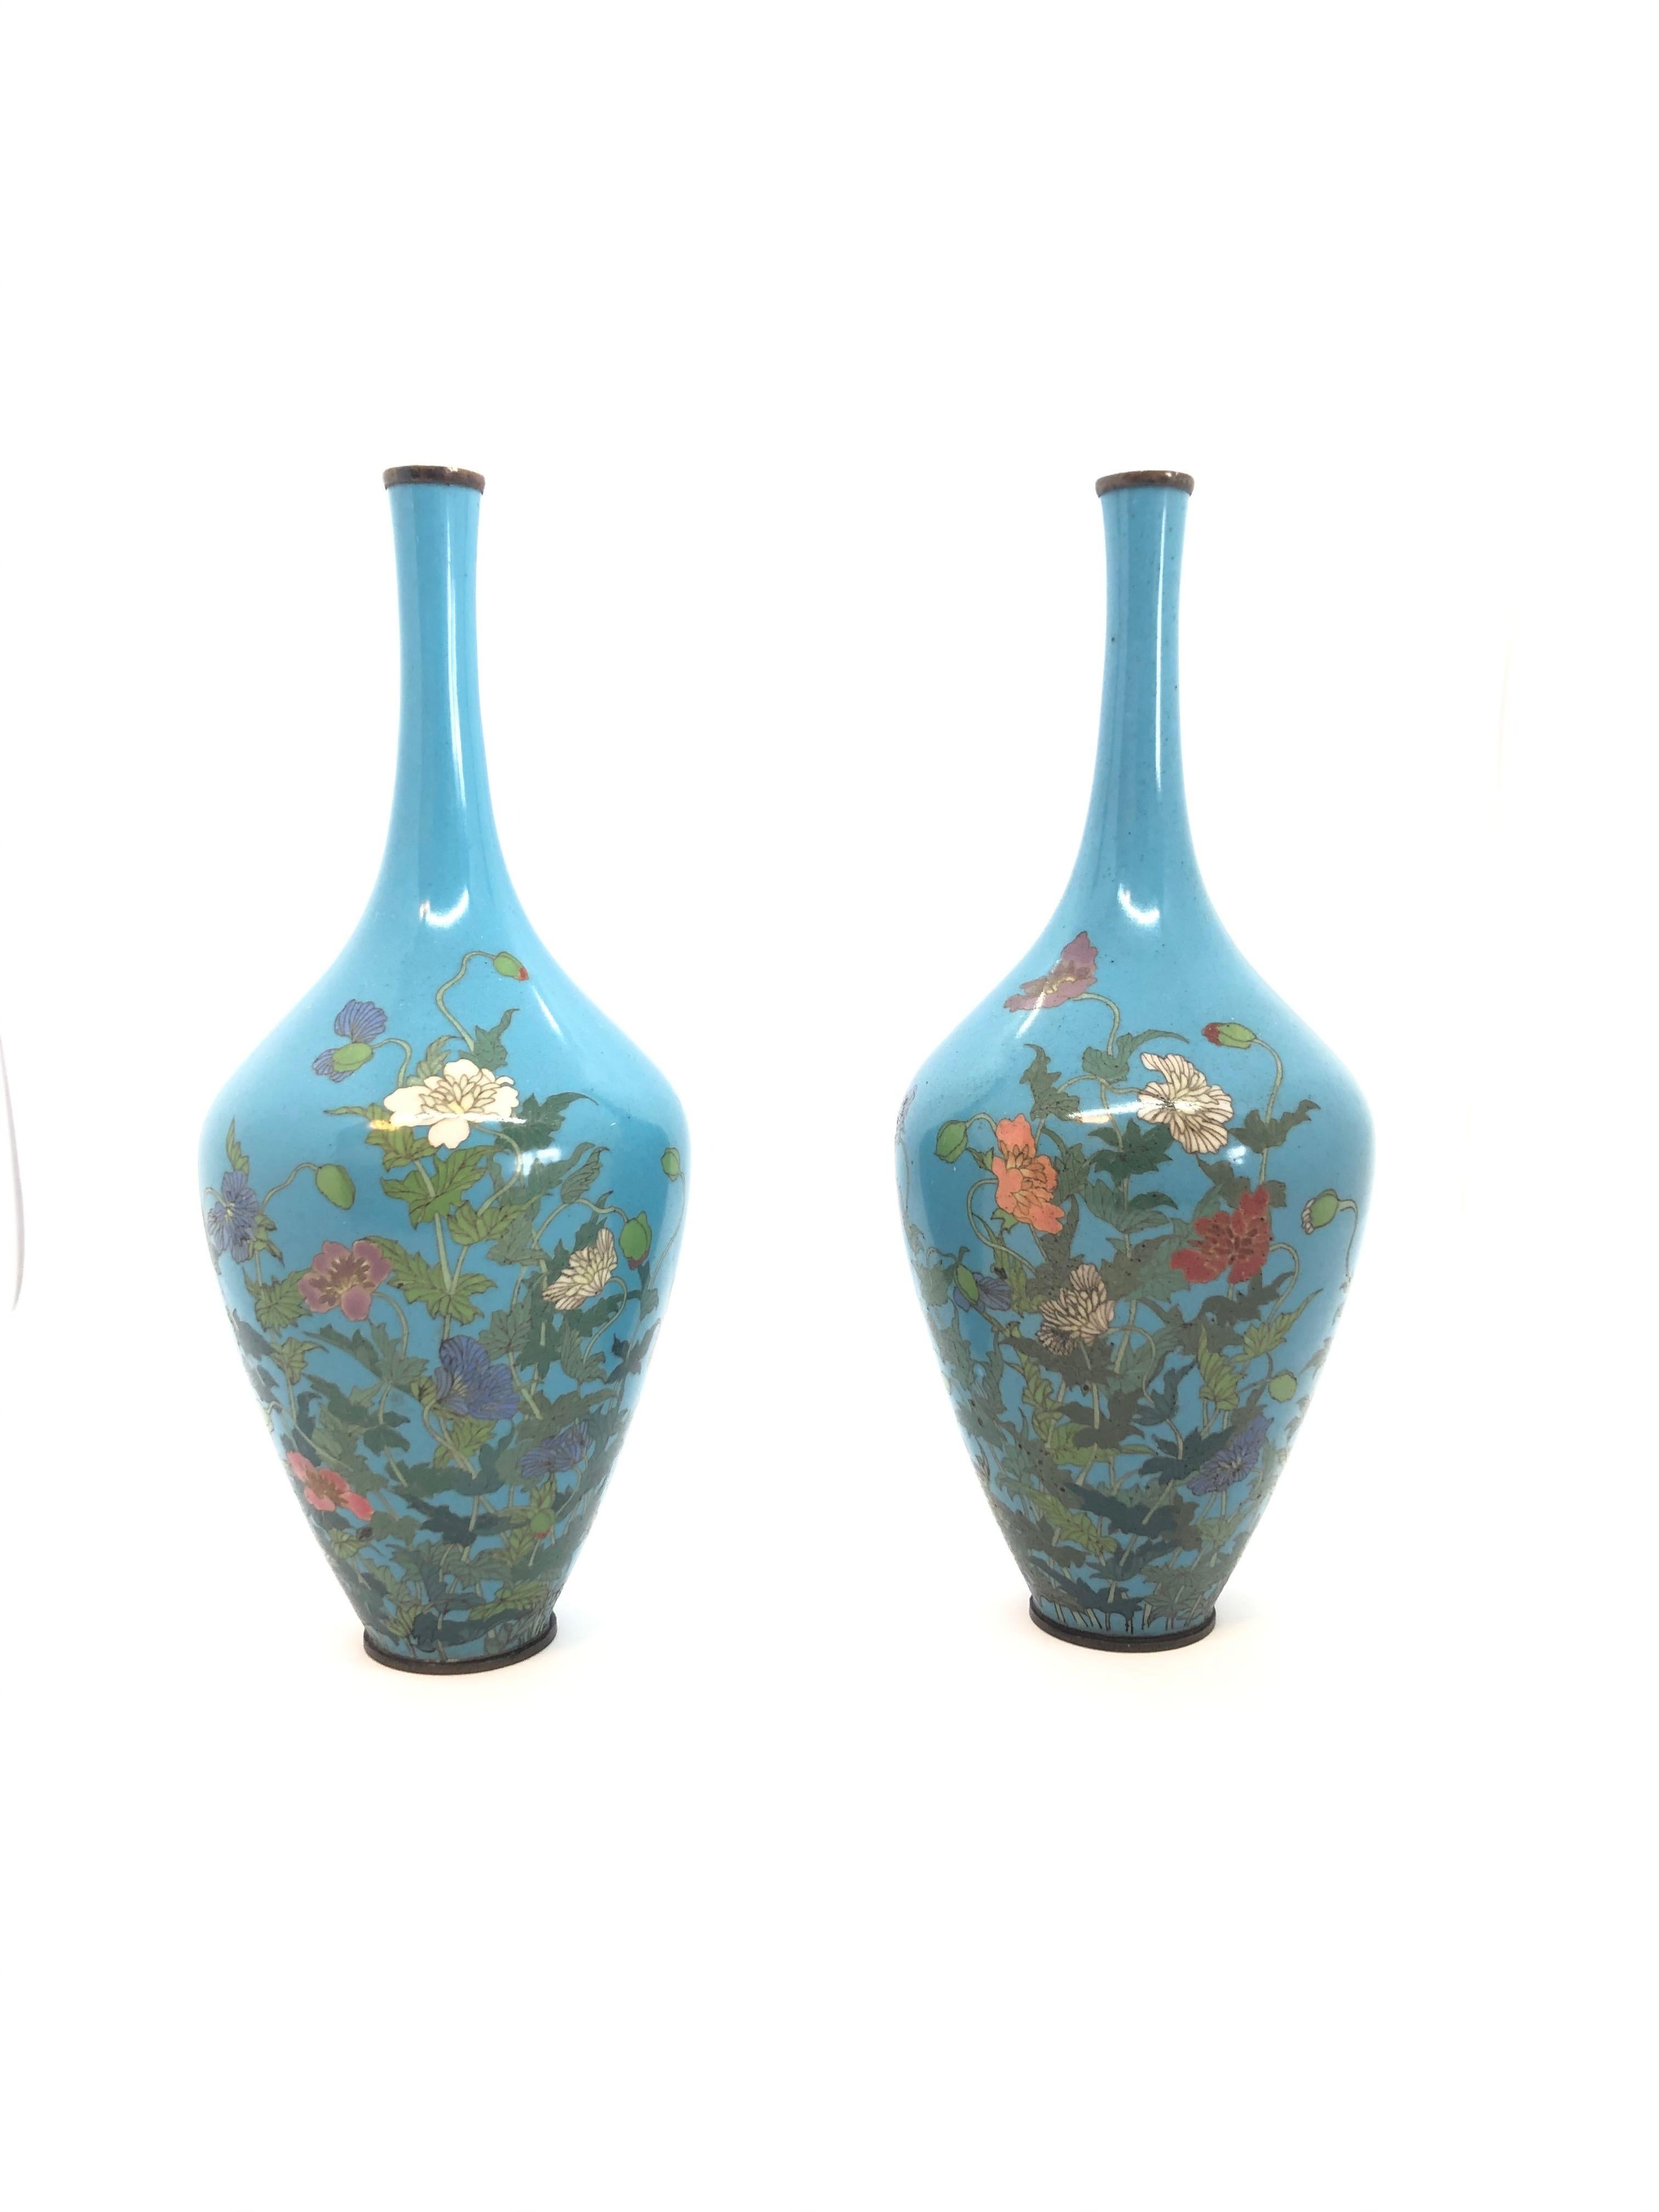 A decorative pair of Japanese cloisonné vases with motives of flowers on a turquoise background. Meiji period.